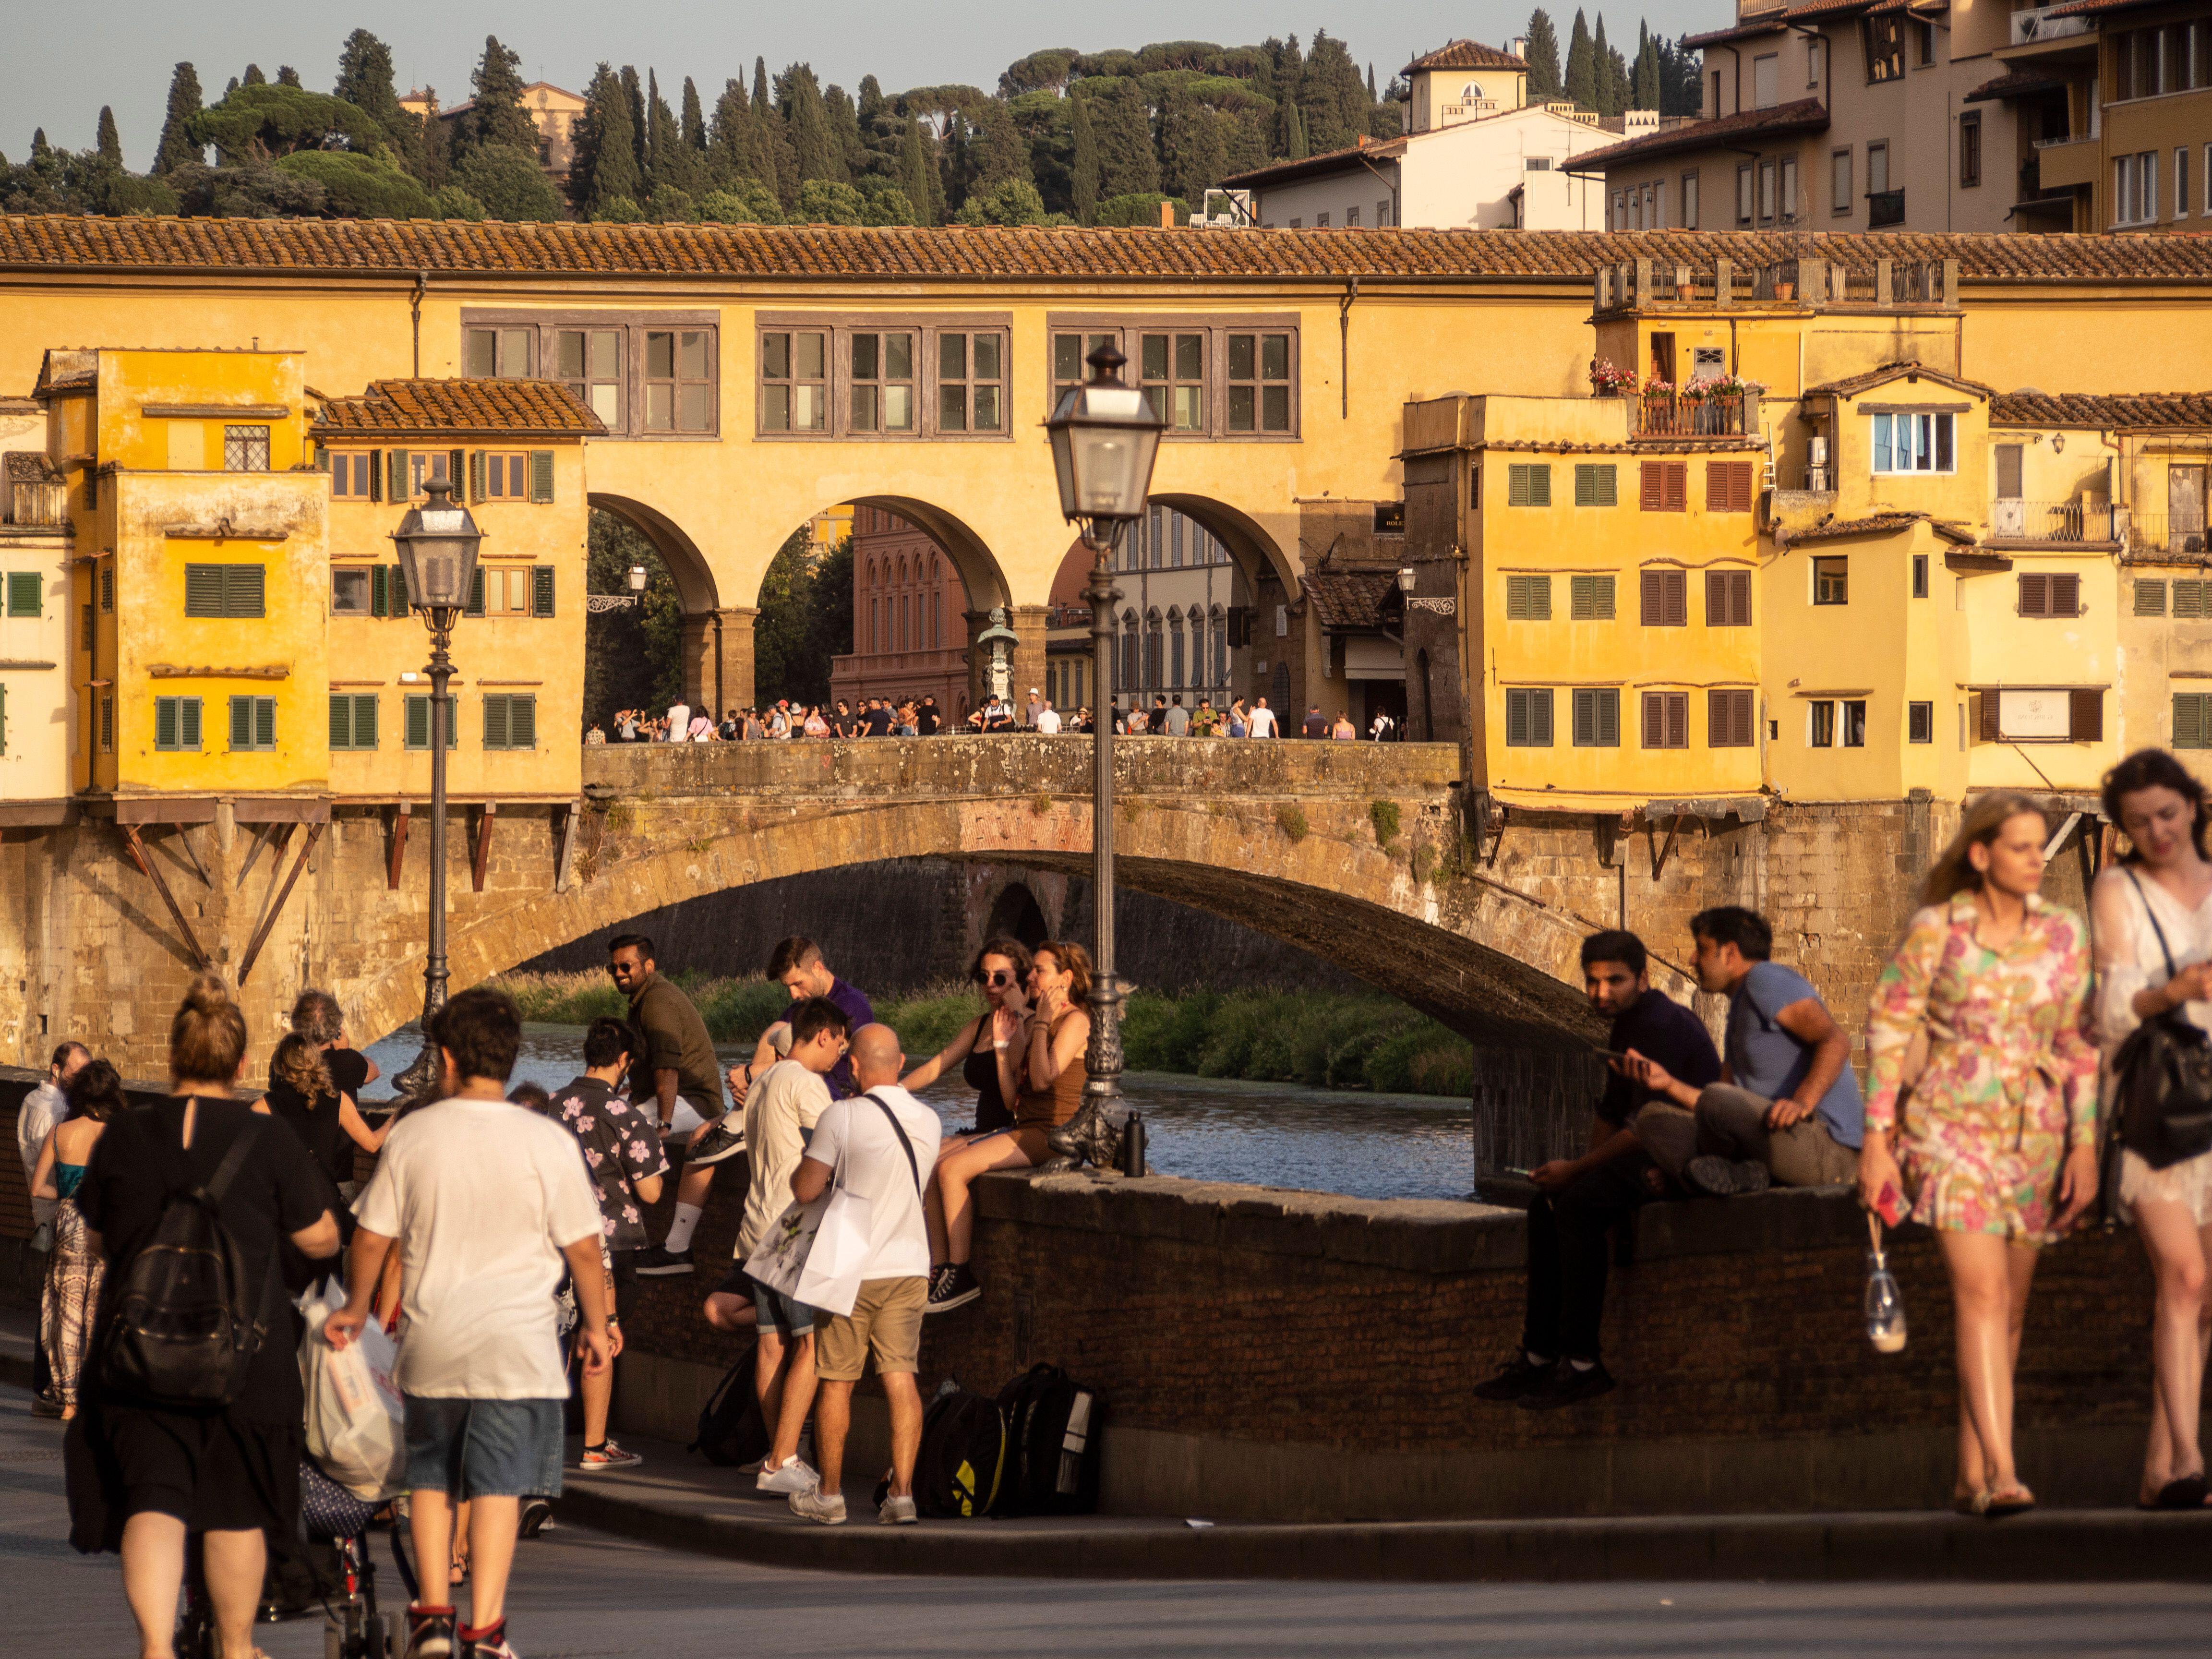 A British man has been found dead at a hotel in Florence alongside a woman suffering from serious injuries (Alamy/PA)